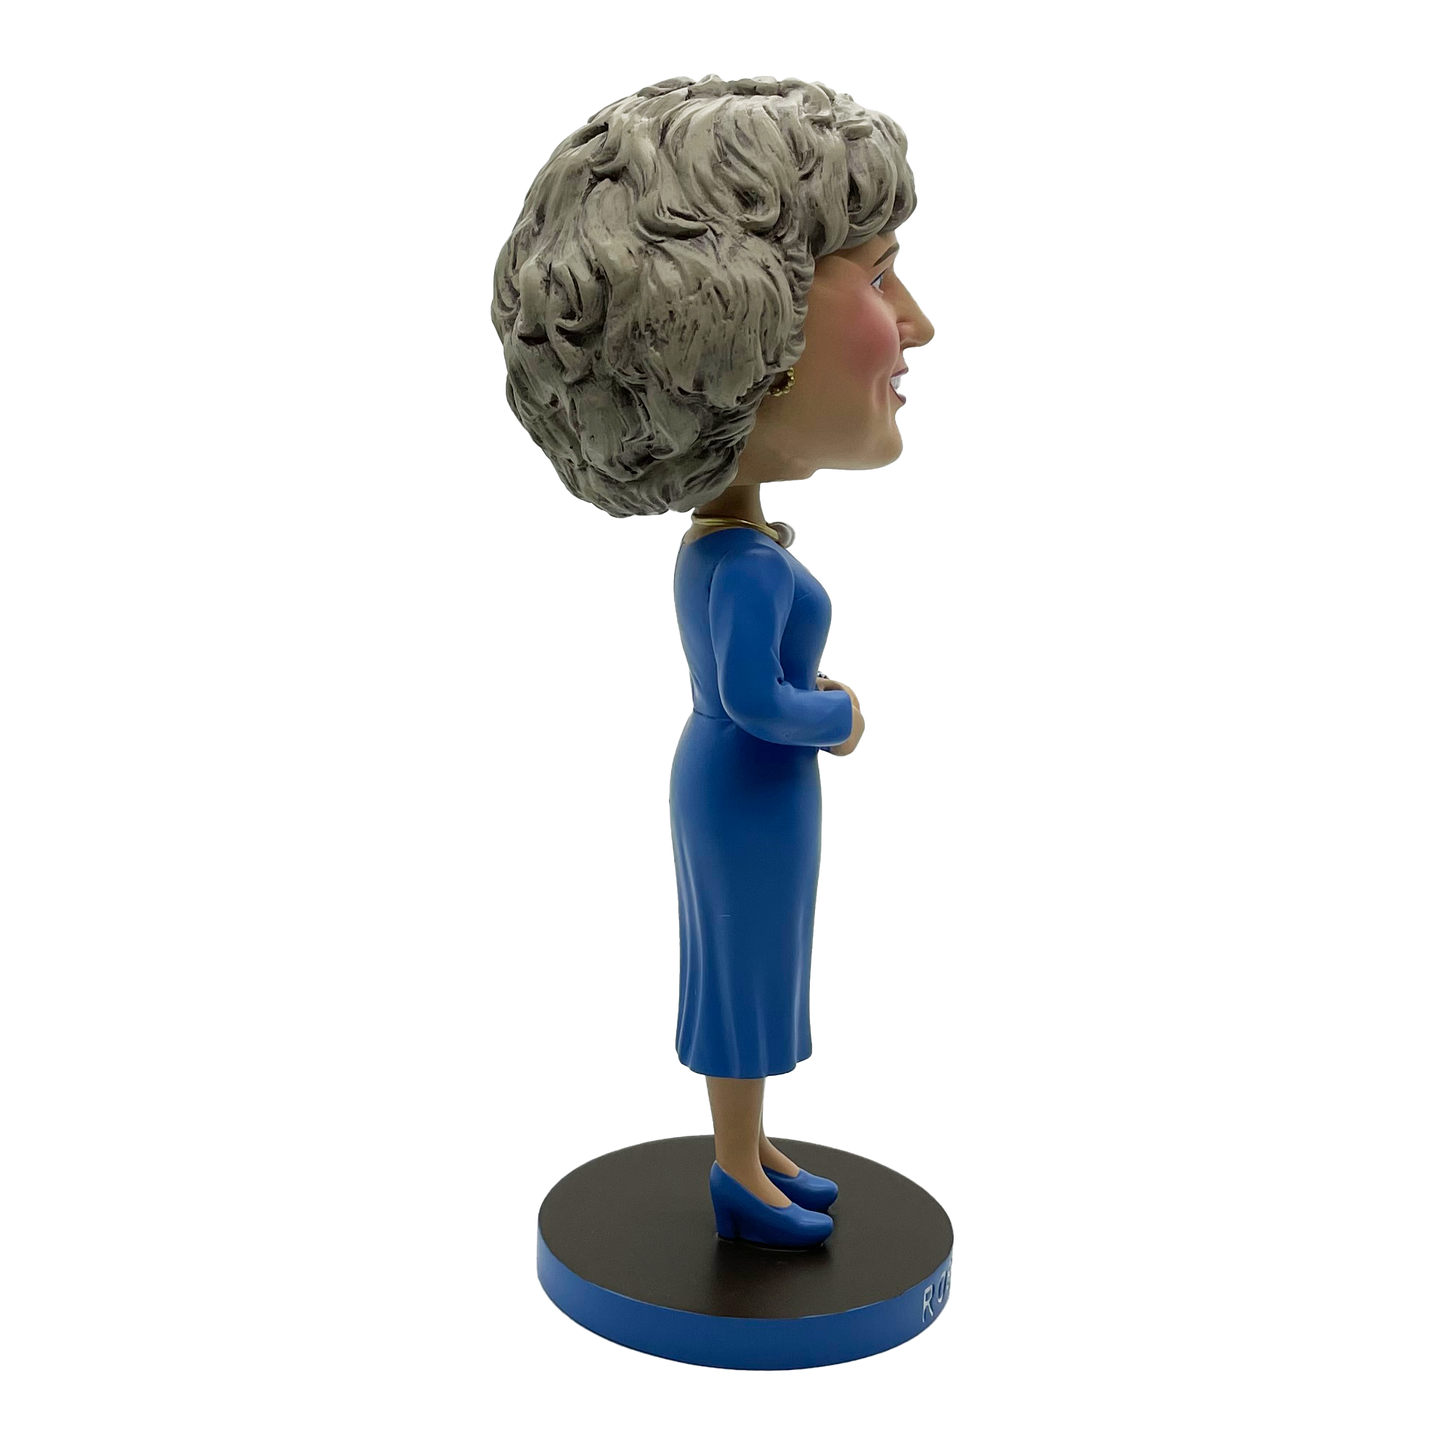 The Golden Girls Rose Nylund Blue Dress Polystone Bobblehead (National Bobblehead Hall of Fame Exclusive) - Available 3rd Quarter 2022 - Icon Heroes 